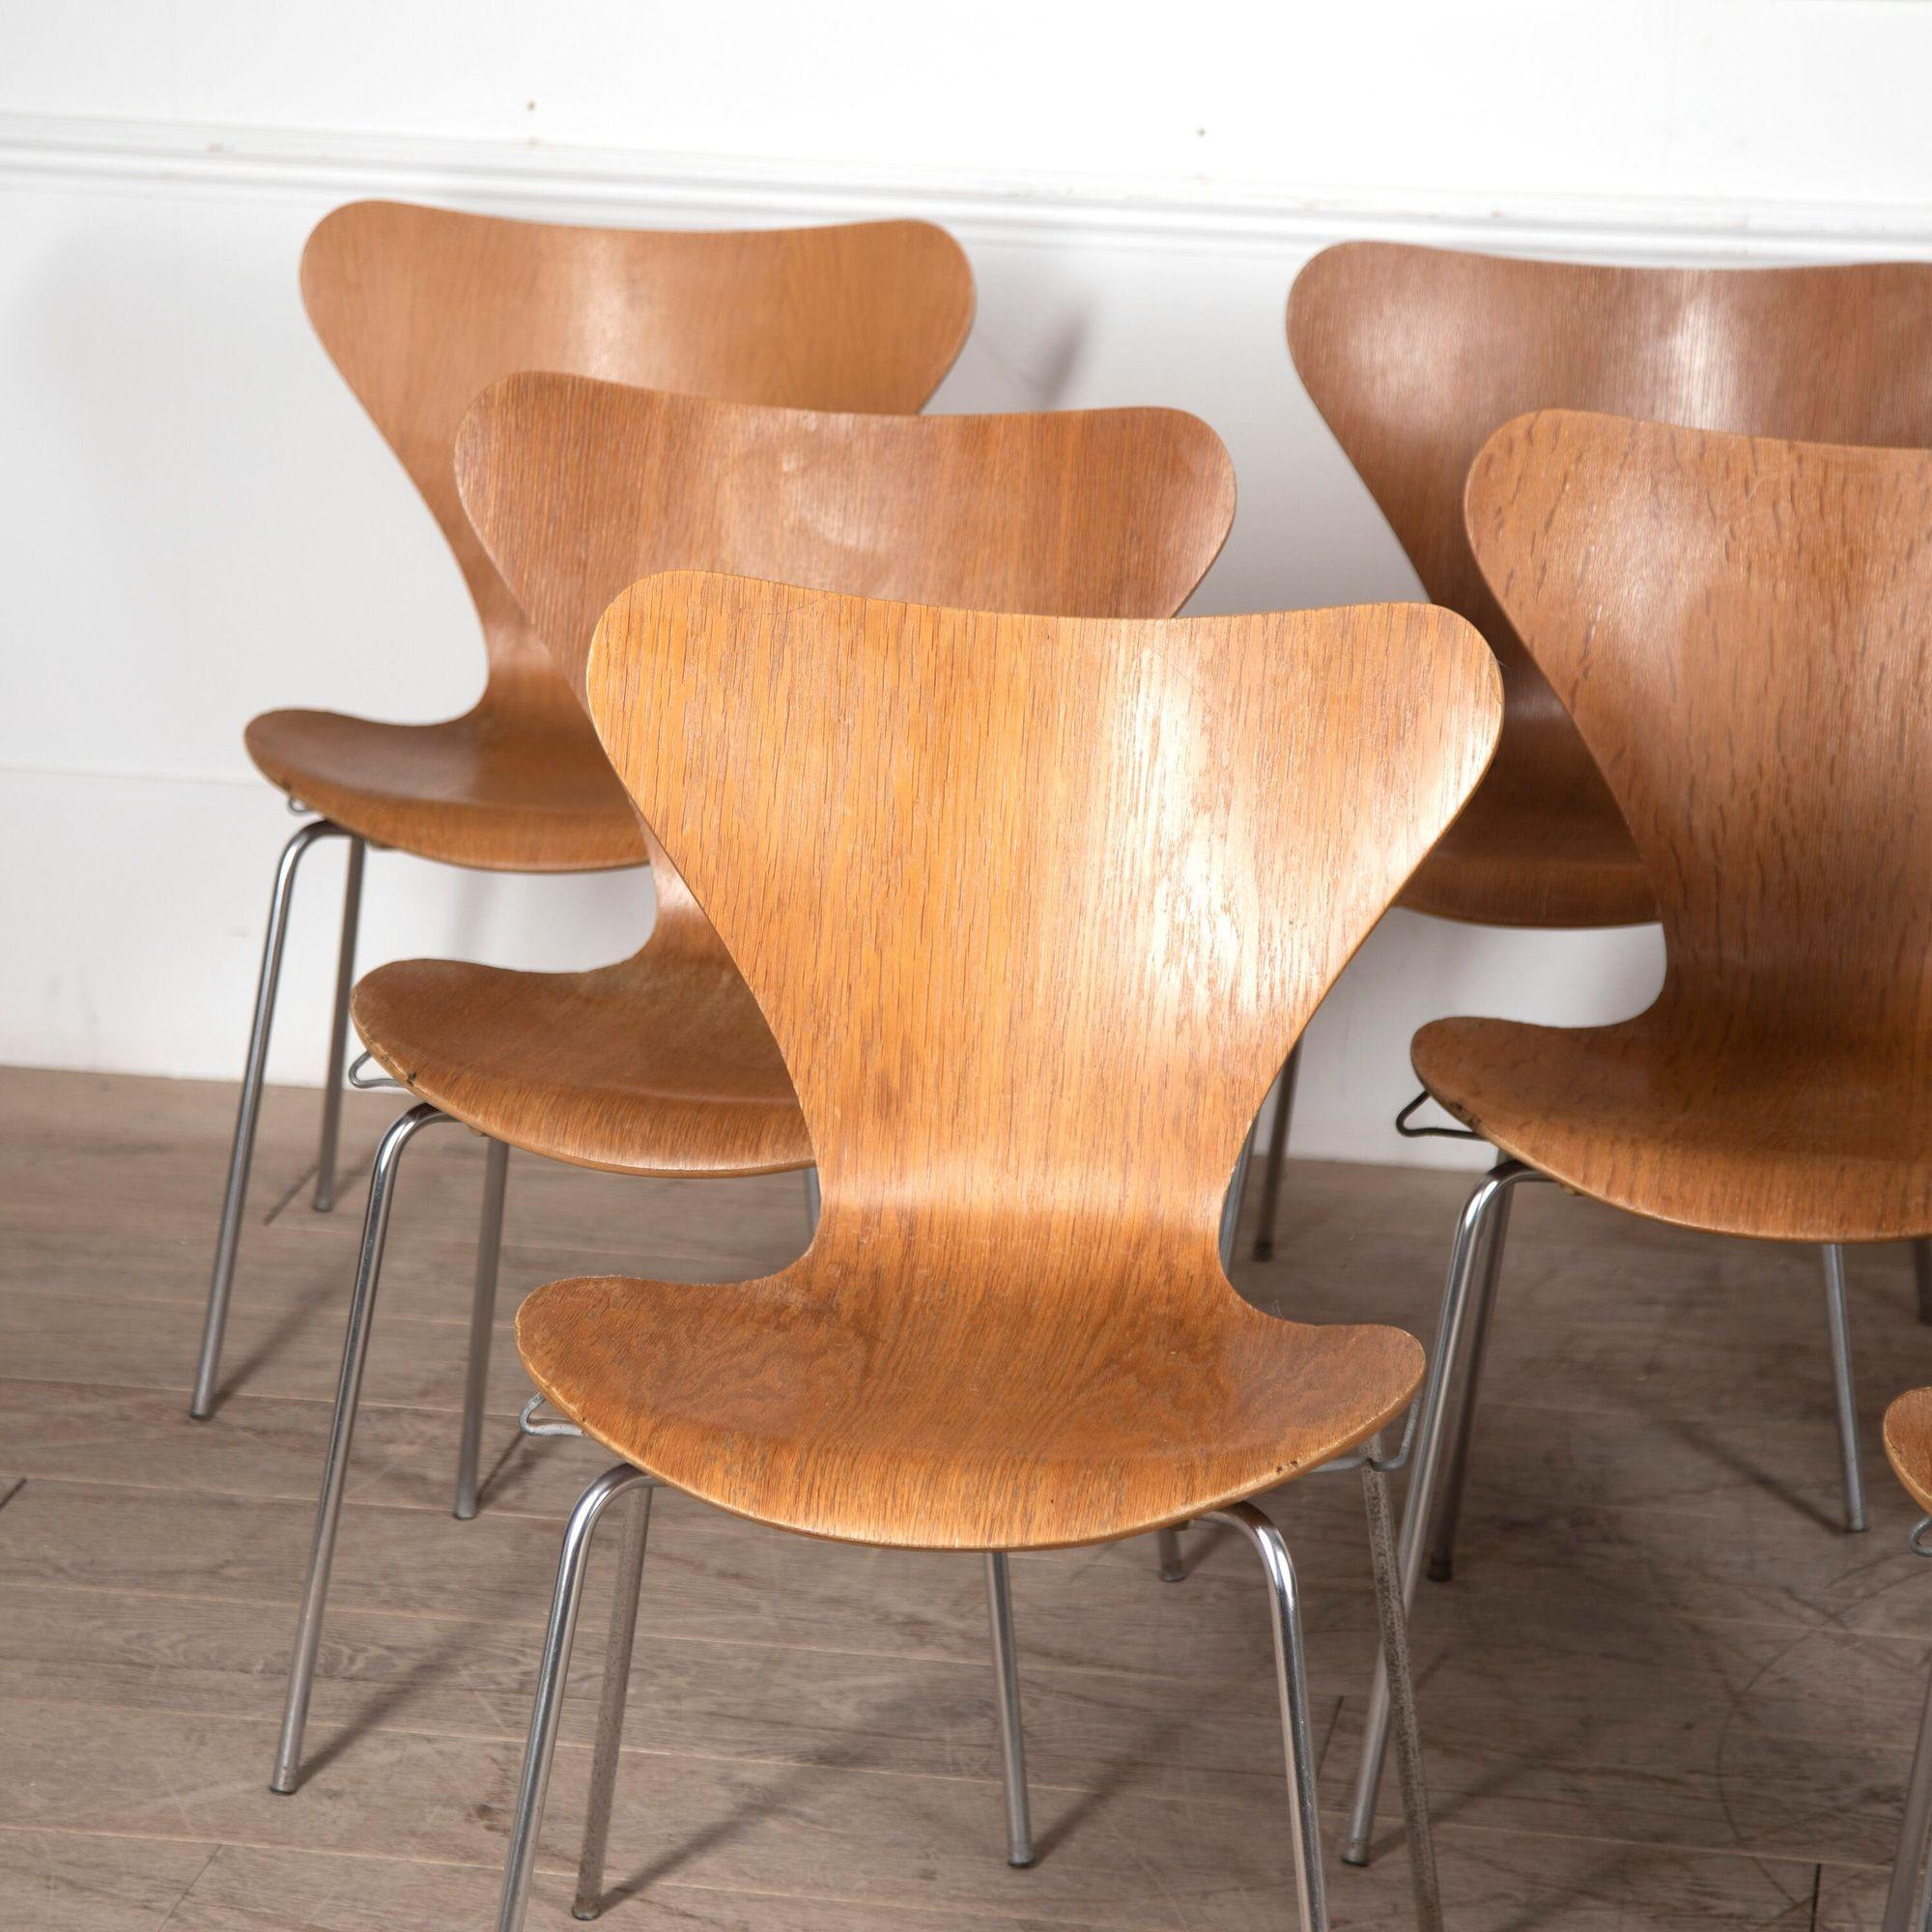 A rare matching set of twelve Danish chairs designed by Arne Jacobsen for FritzHansen who influenced designers and architects around the world.
The 'series 7' chair was manufactured by Fritz Hansen and first produced in 1955.
All of these chairs